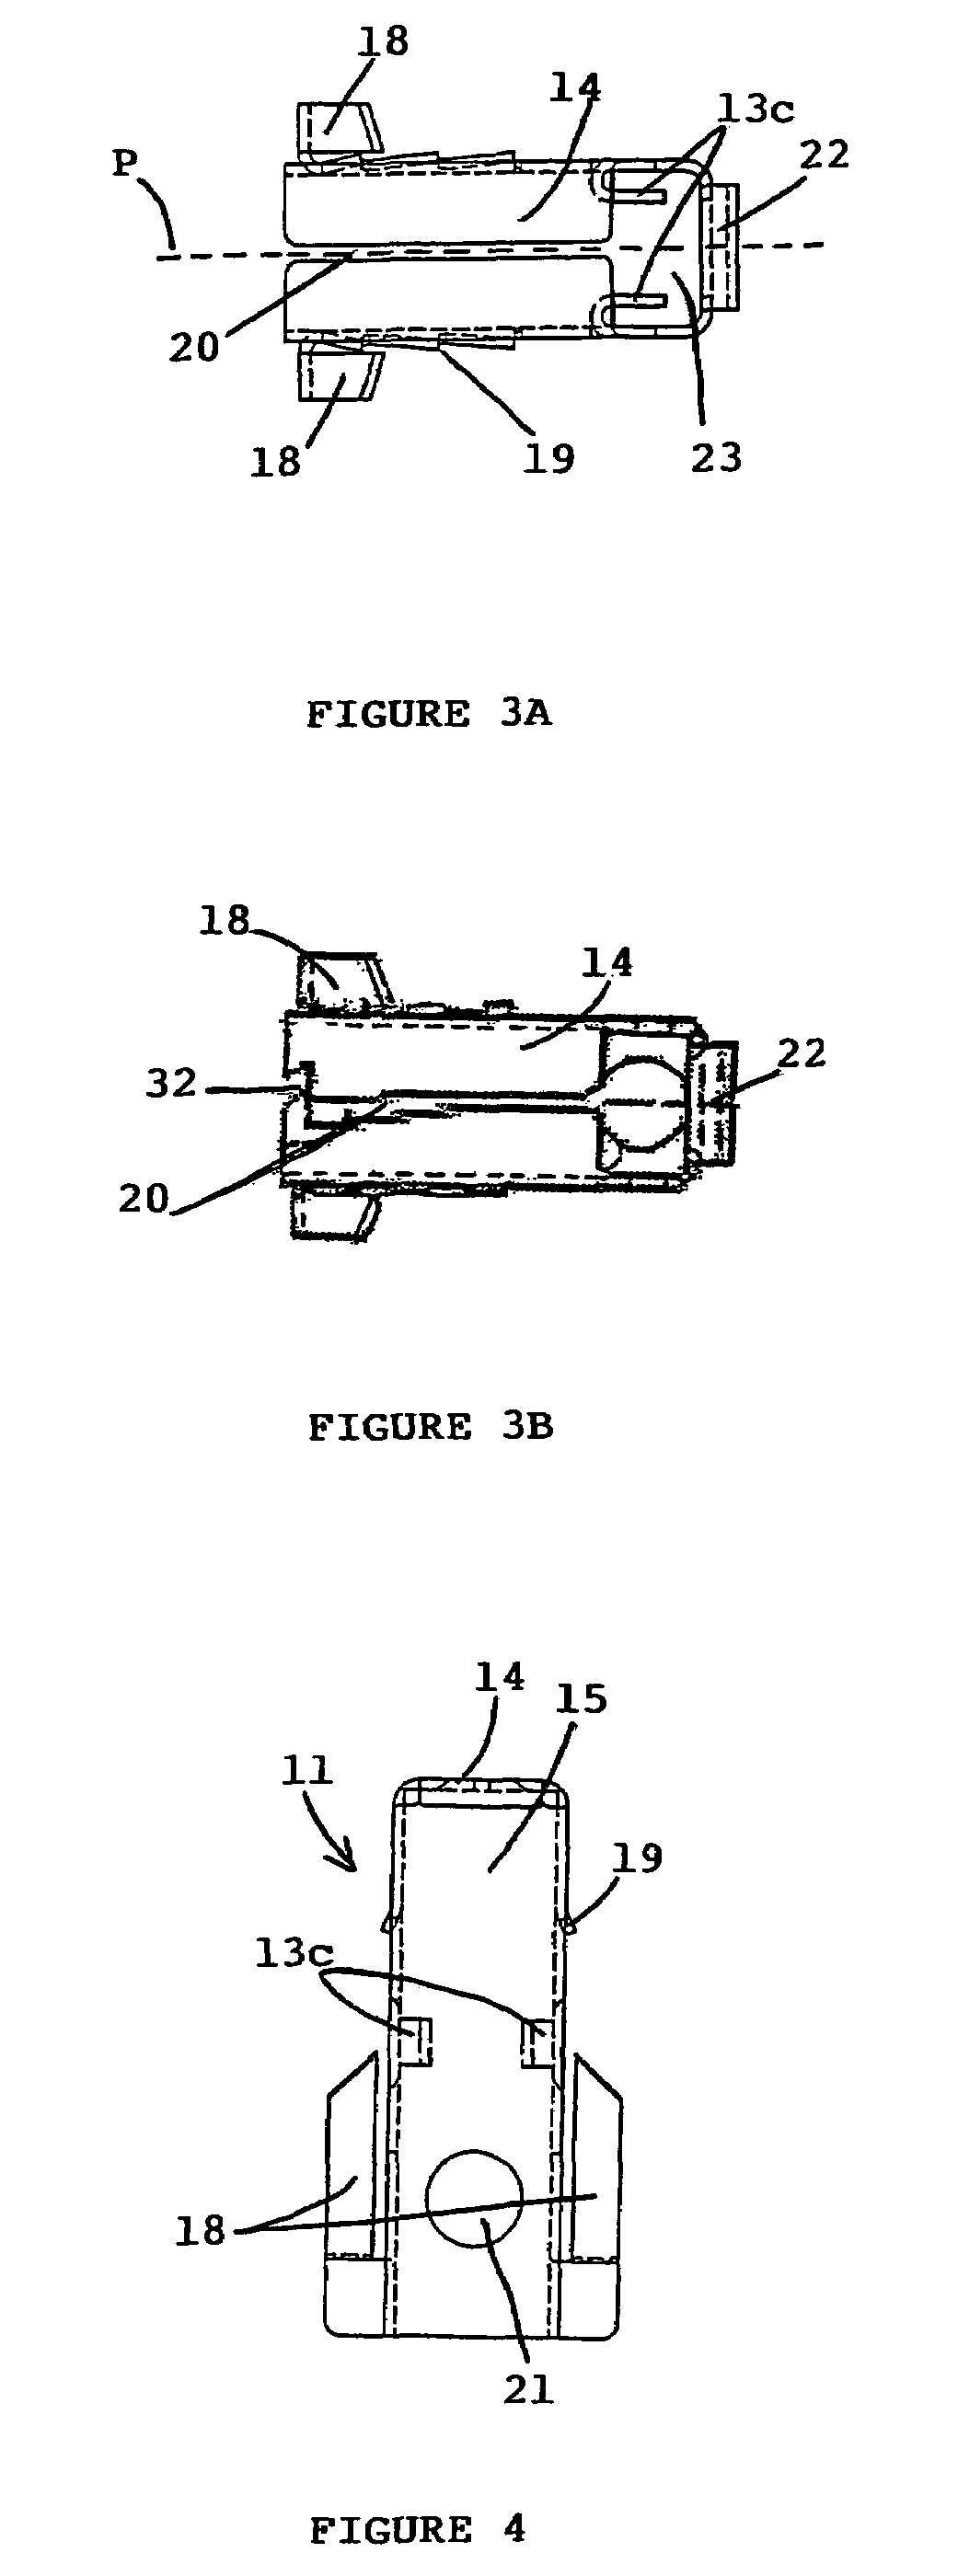 Attachment device for fixing various elements to a support